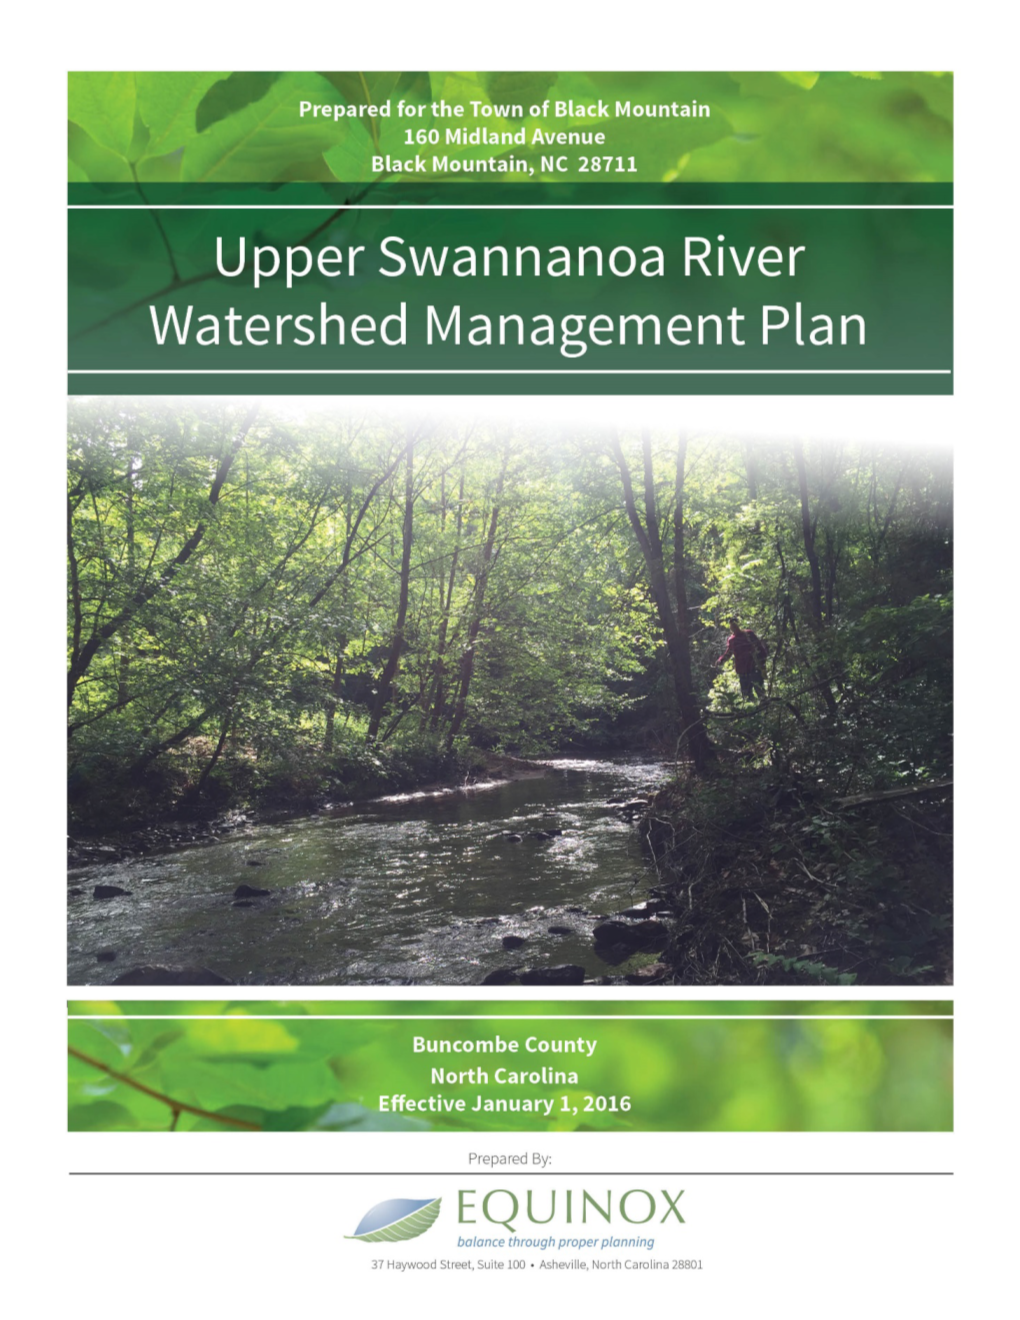 Upper Swannanoa Watershed